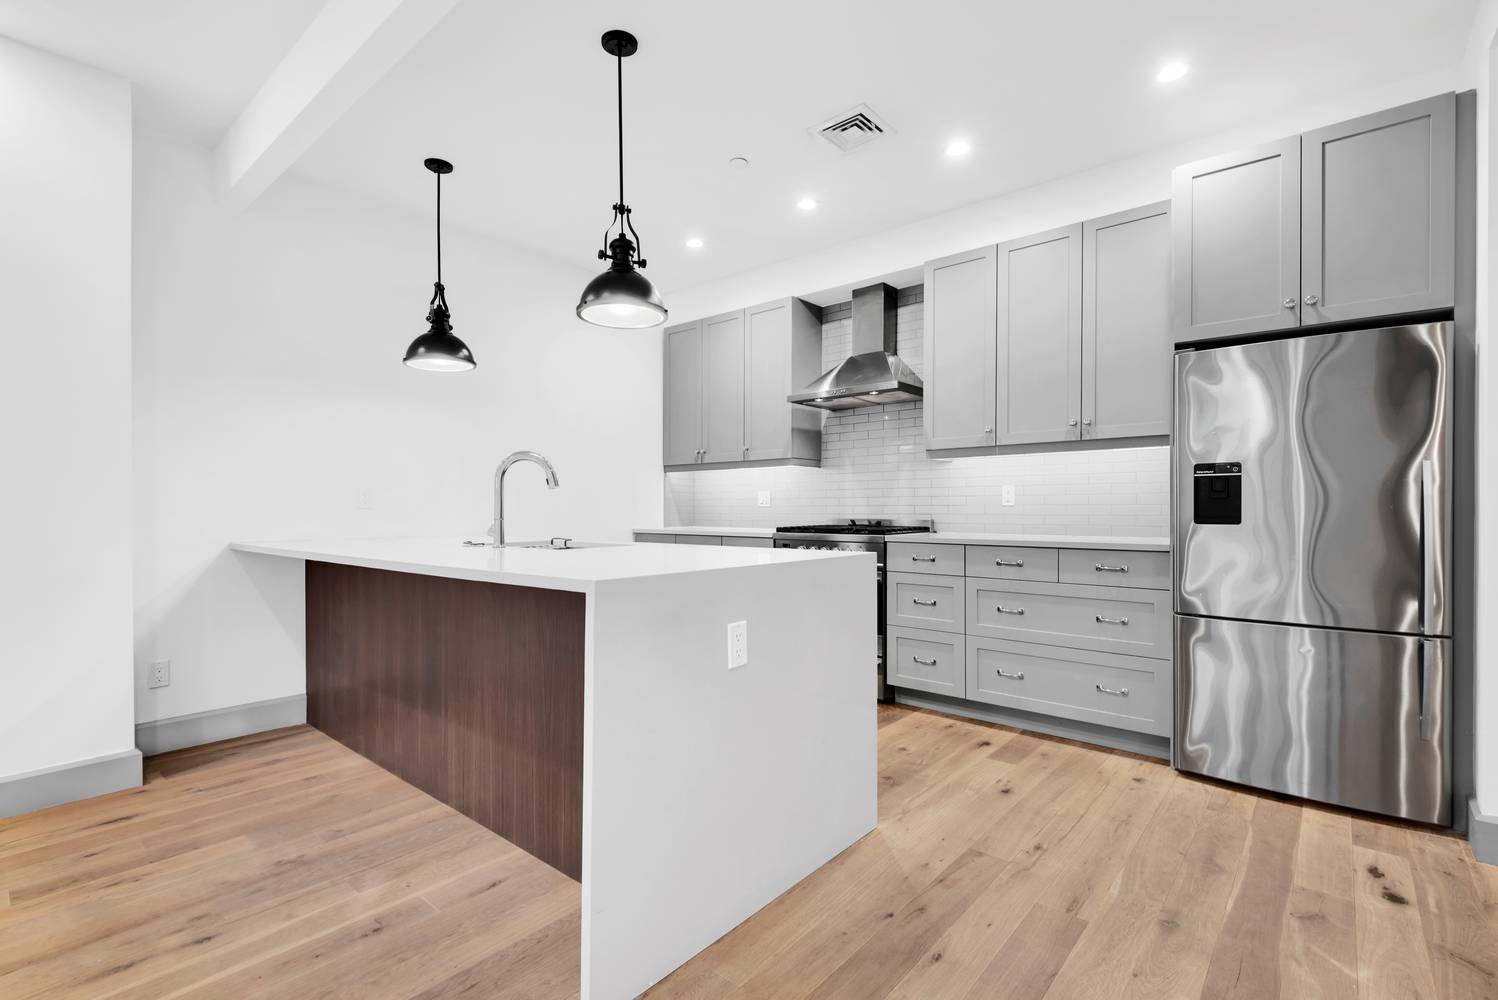 88 Lefferts Place 1B is an exquisite, well crafted one bedroom condo on one of Clinton Hill s most coveted tree lined blocks.